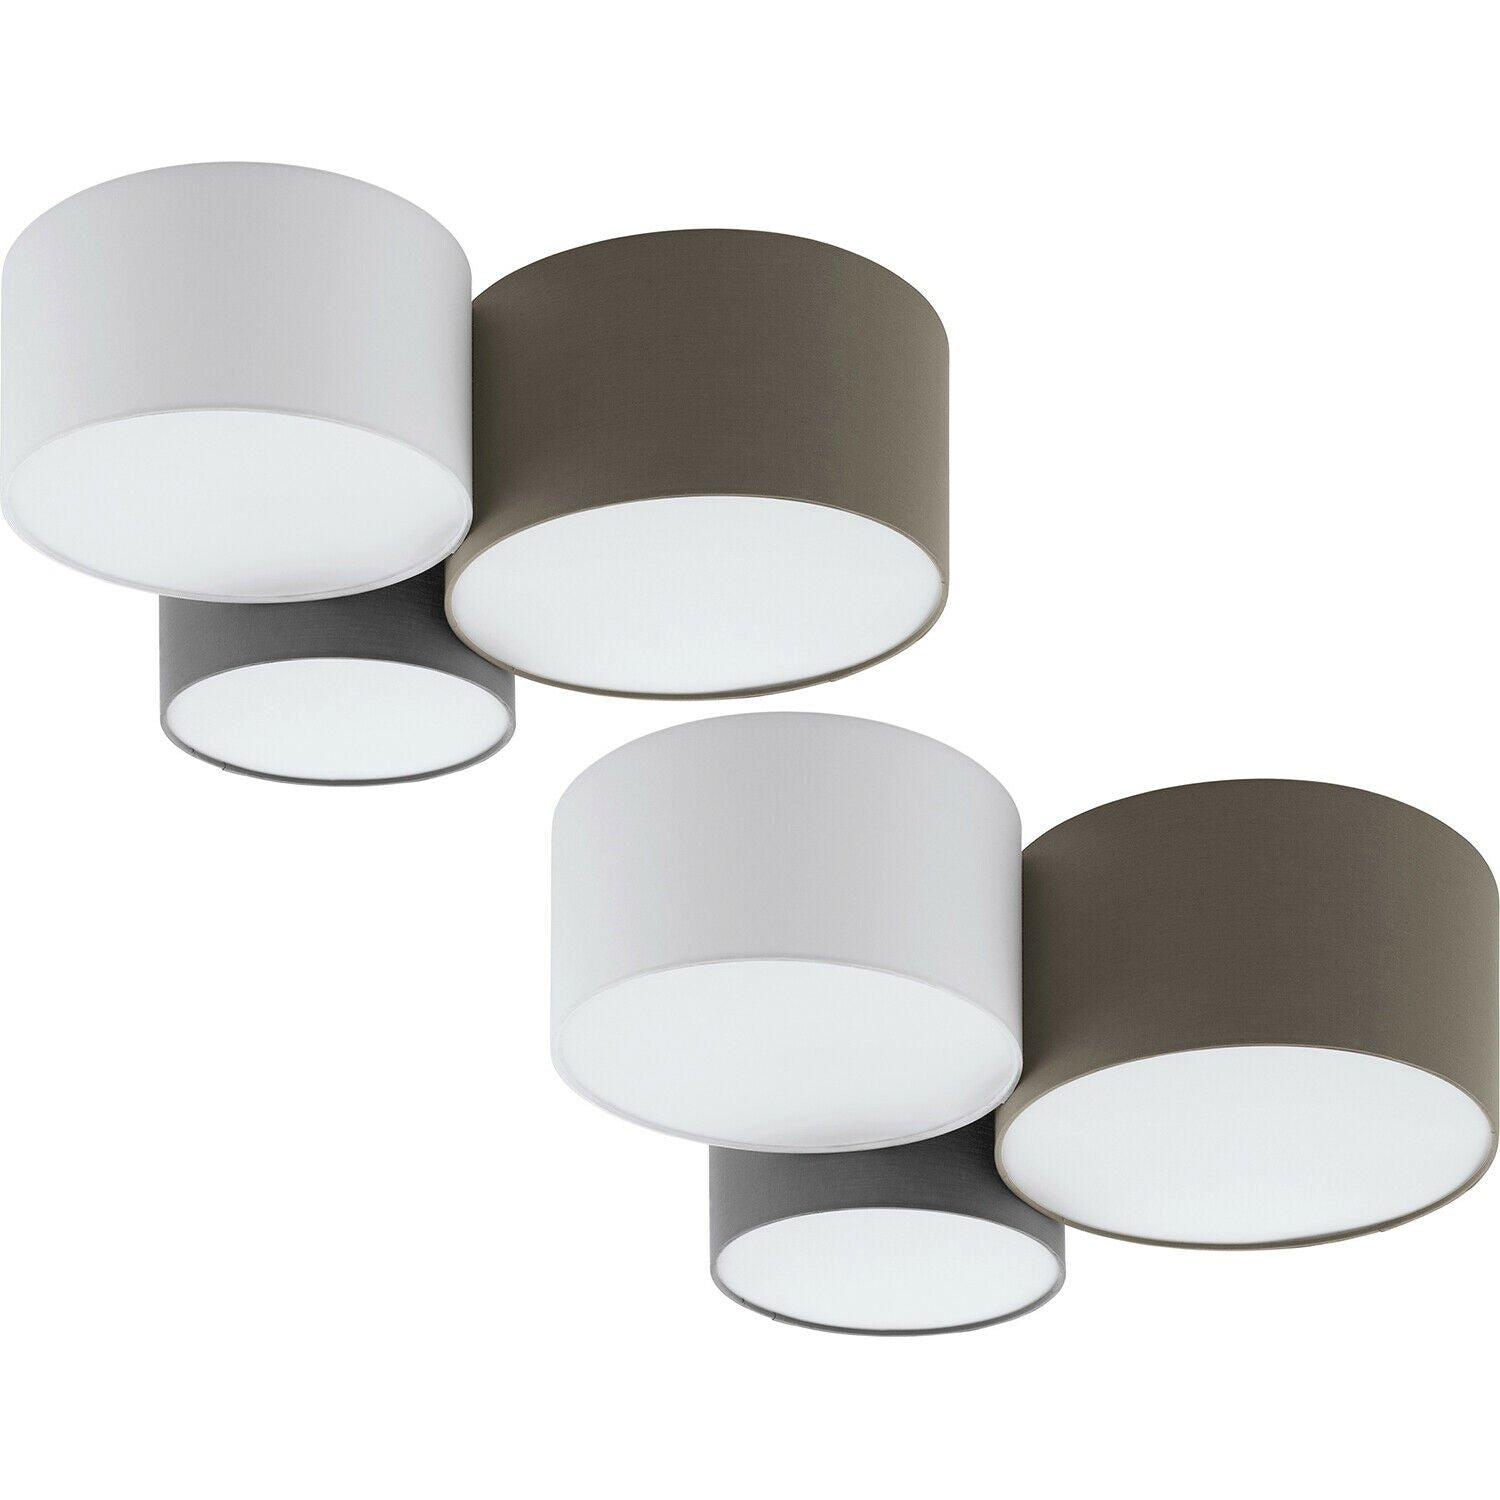 2 PACK Wall Flush Ceiling Light White Anthracite Brown White Grey Fabric 3x E27